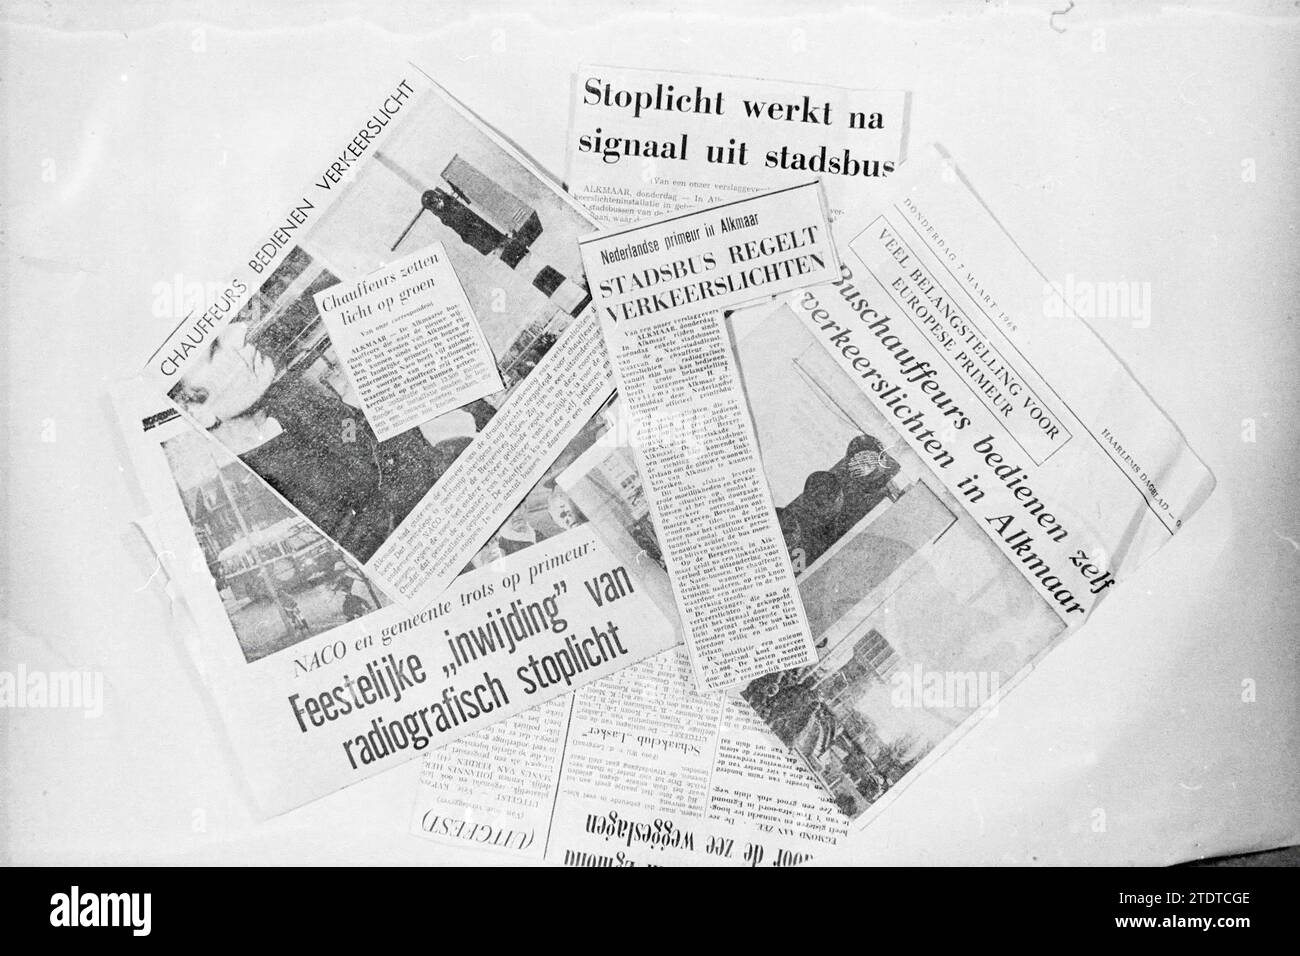 Newspaper clippings about signal from bus regulating traffic lights, 1968, Whizgle News from the Past, Tailored for the Future. Explore historical narratives, Dutch The Netherlands agency image with a modern perspective, bridging the gap between yesterday's events and tomorrow's insights. A timeless journey shaping the stories that shape our future Stock Photo